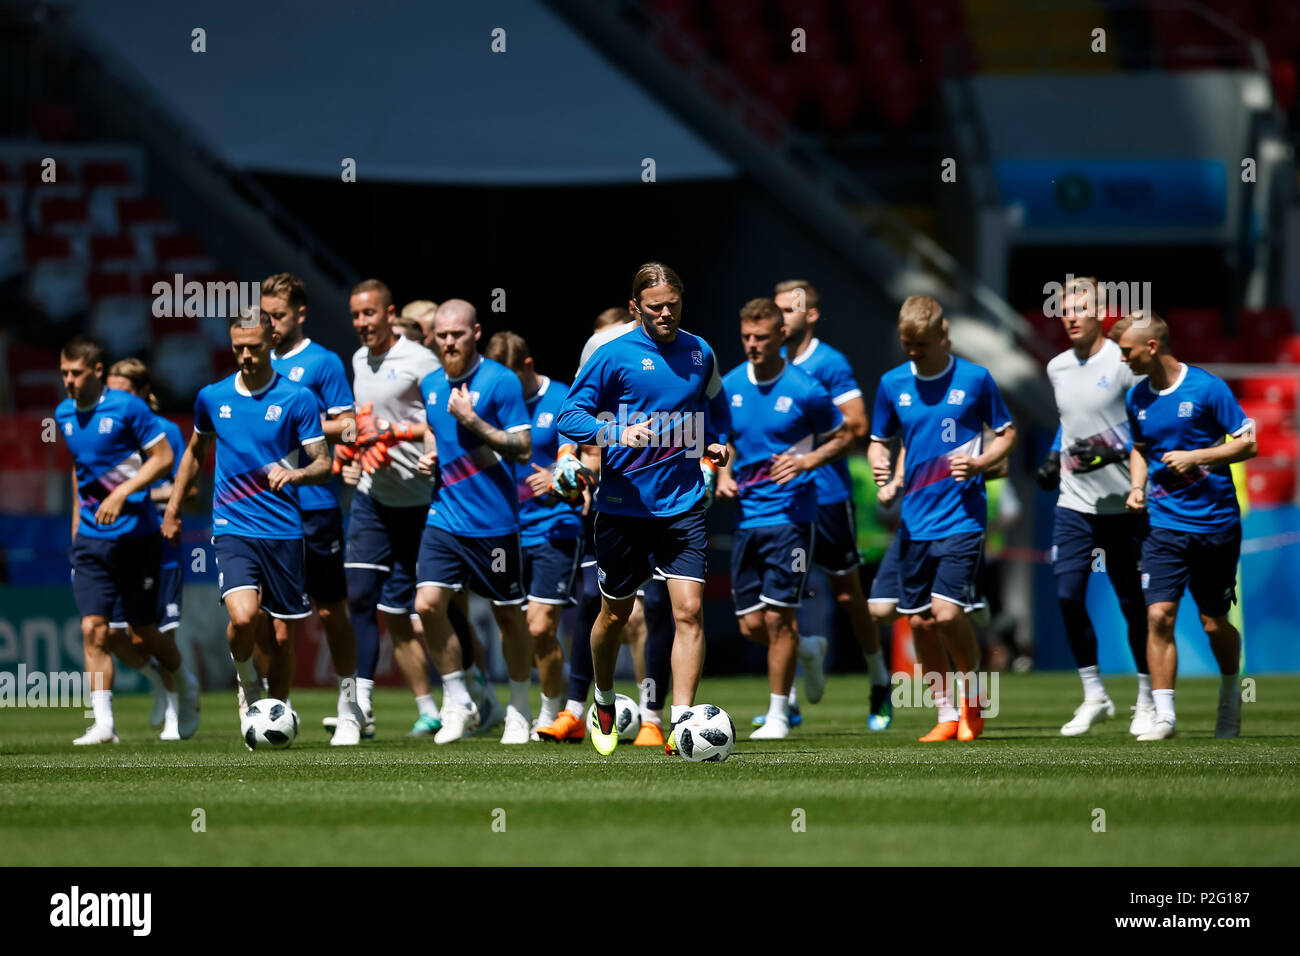 Moscow, Russia. 15th June 2018. Birkir Bjarnason of Iceland during an Iceland training session, prior to their 2018 FIFA World Cup Group D match against Argentina, at Spartak Stadium on June 15th 2018 in Moscow, Russia. Credit: PHC Images/Alamy Live News Stock Photo